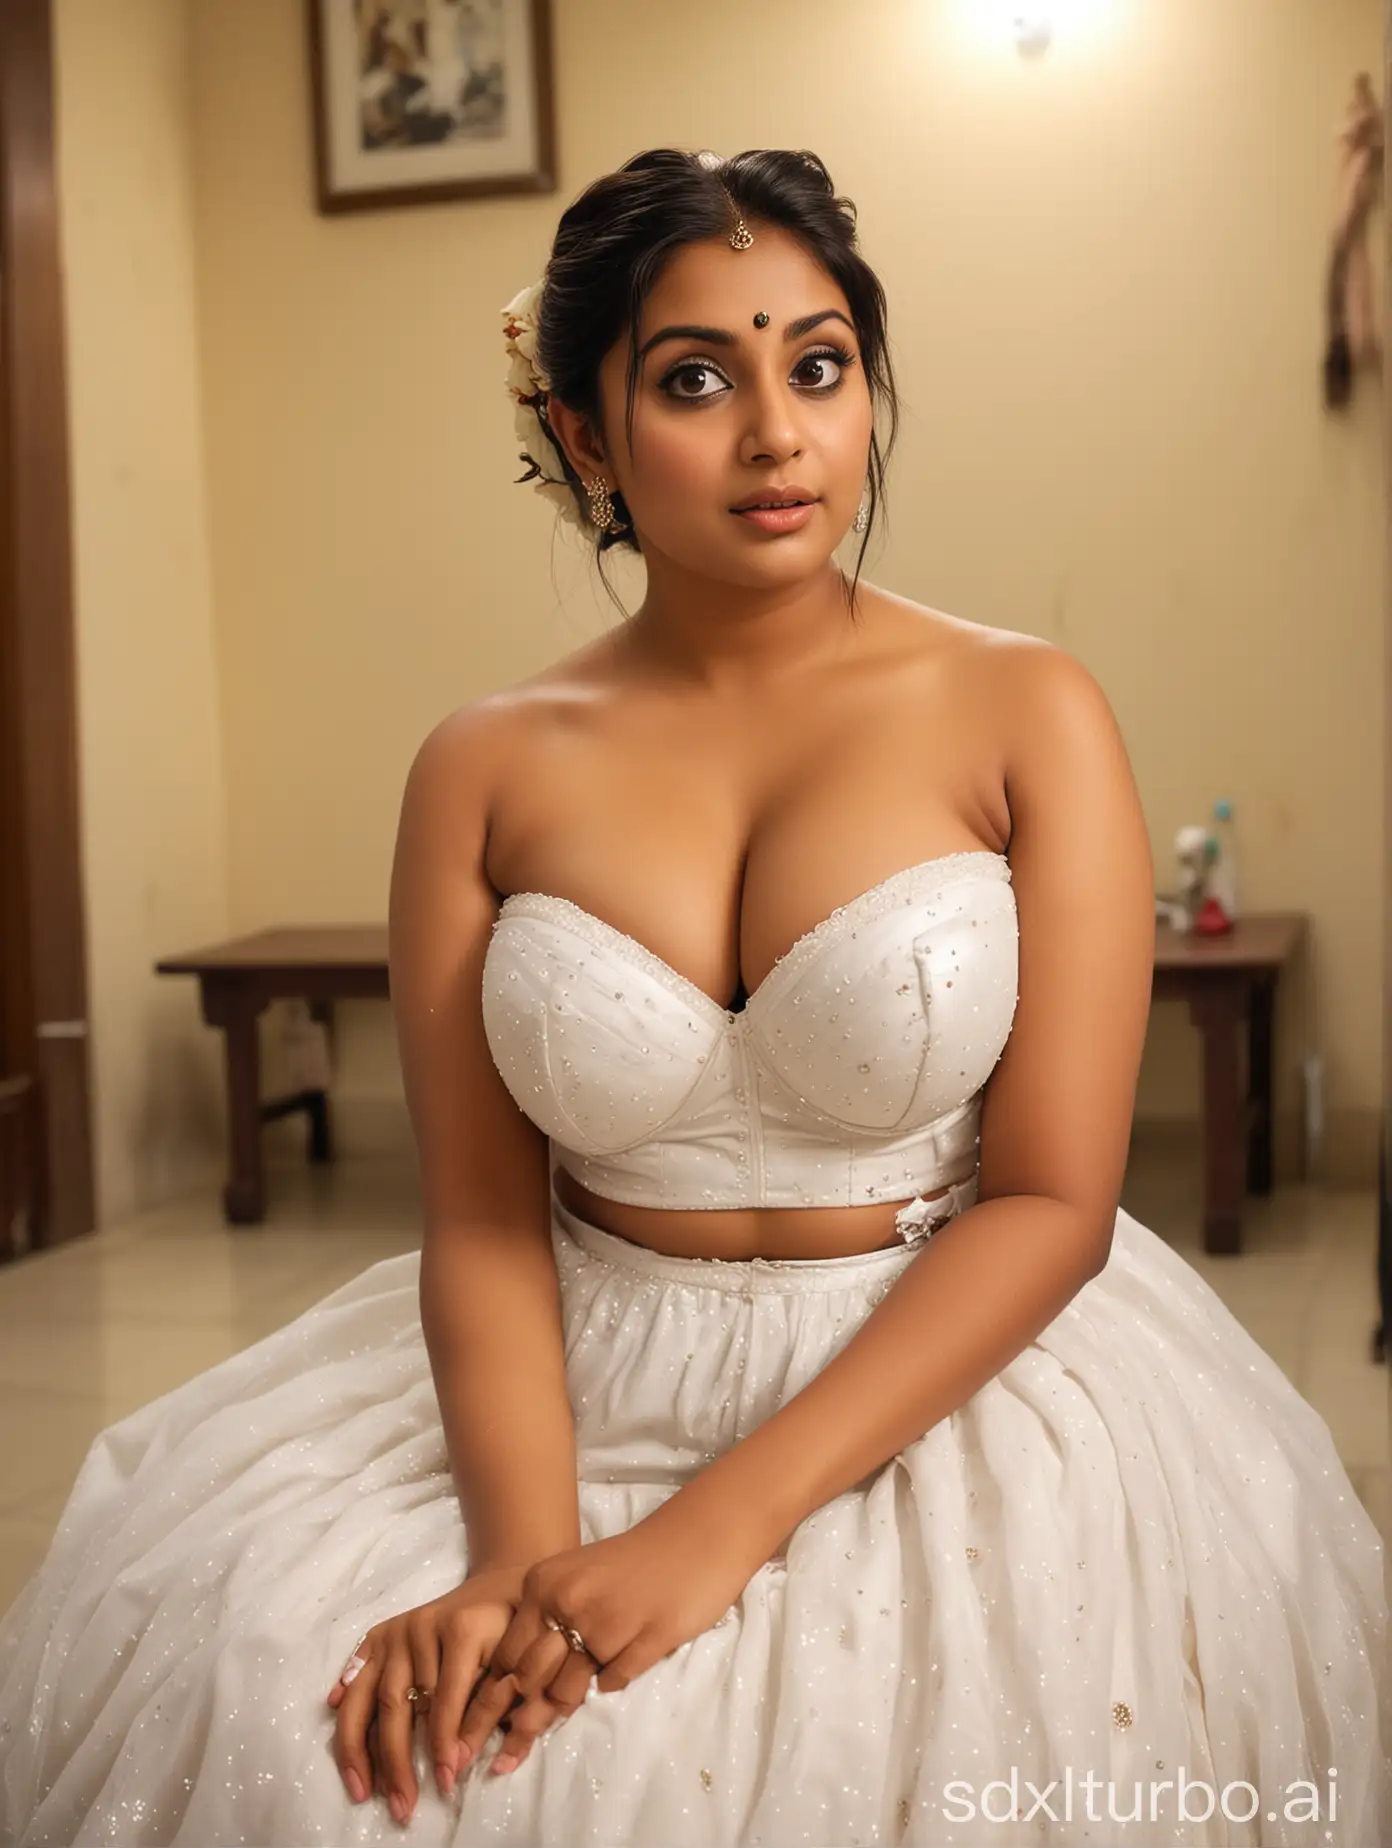 CURVY indian church bride with huge boobs, with Plump female body and hair bun, with white strapless bra with deep cleavage and low waisted bridal skirt, she has busty body, is sitting at the well lit dressing room. big eyes, blurred background, ultra focus, face illuminated, face detailed, 16k resolution, full body view.